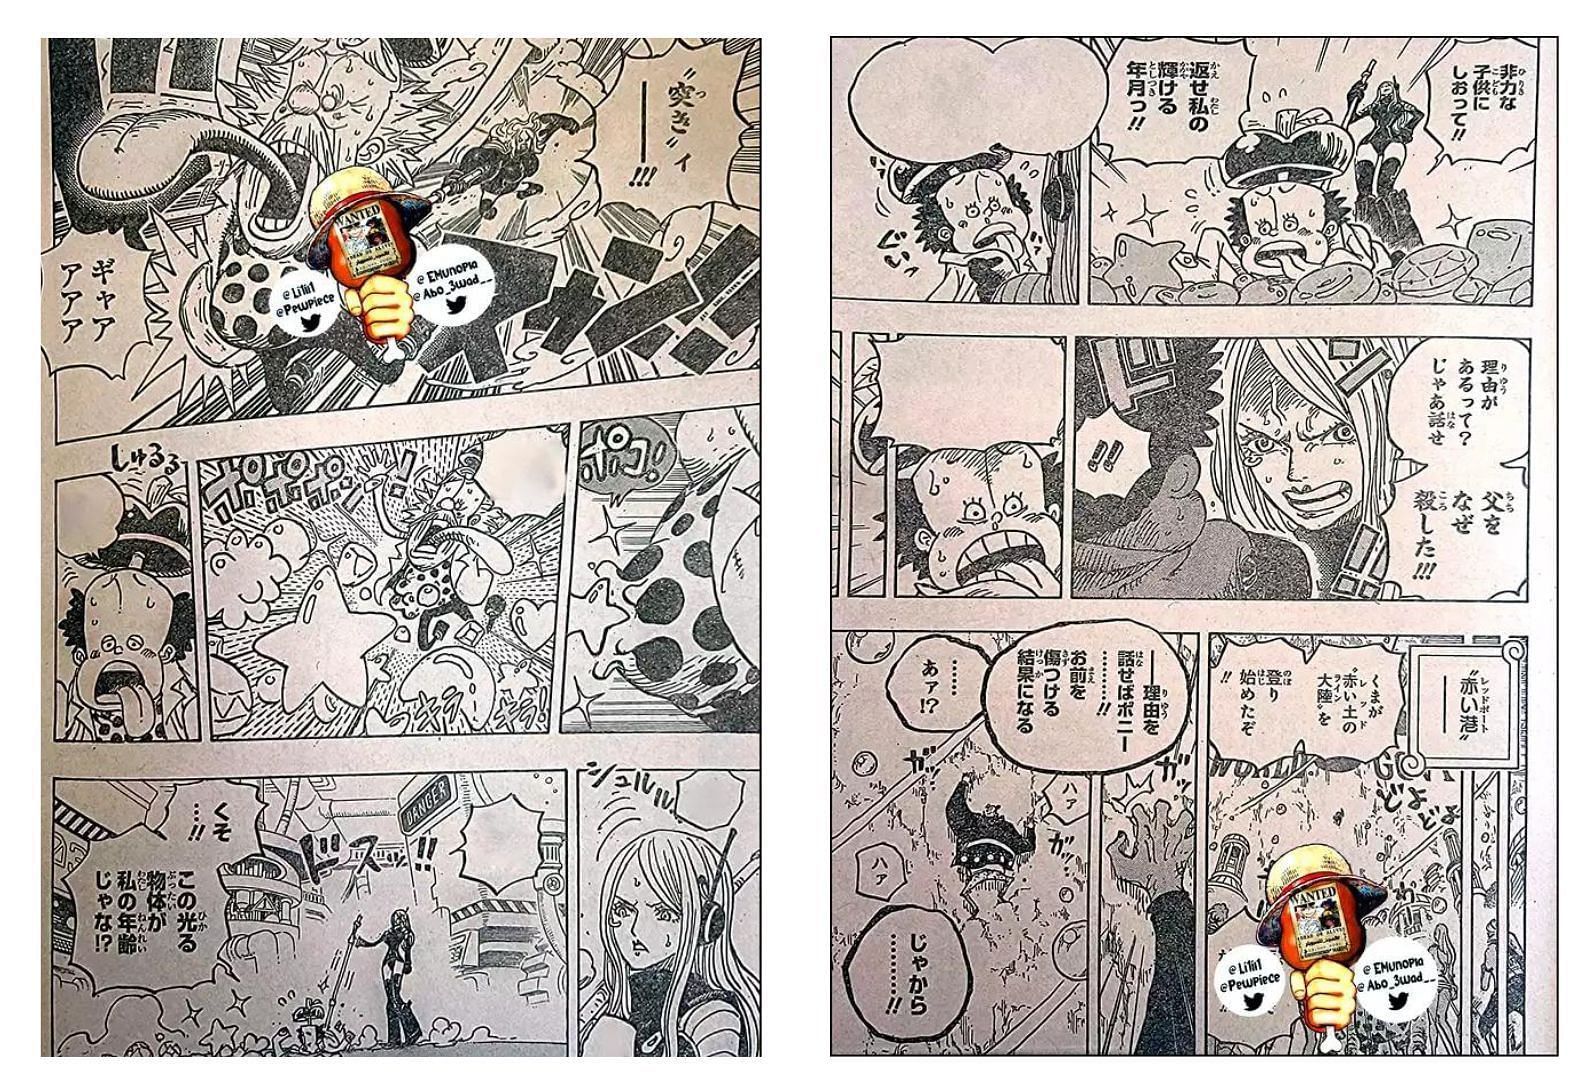 Bonney gets a hold of Vegapunk and turns him into a child (Image via Eiichiro Oda)